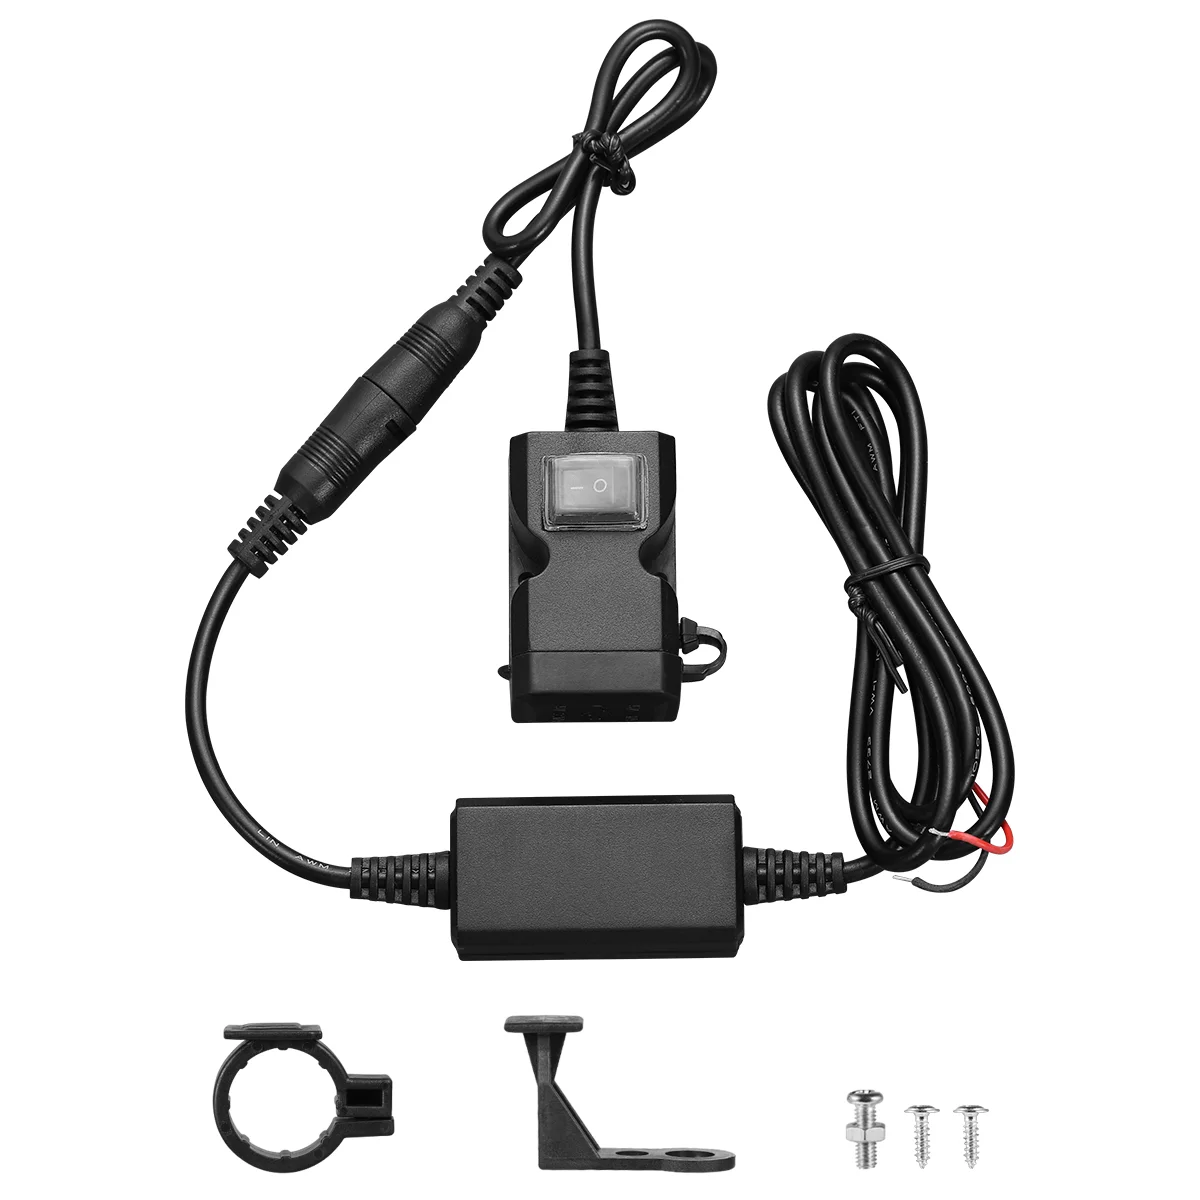 

1 Pc USB Motorcycle Waterproof Dual Ports 3.1A Fast Charging Power Adapter for Motorcycle Scooter Tricycle